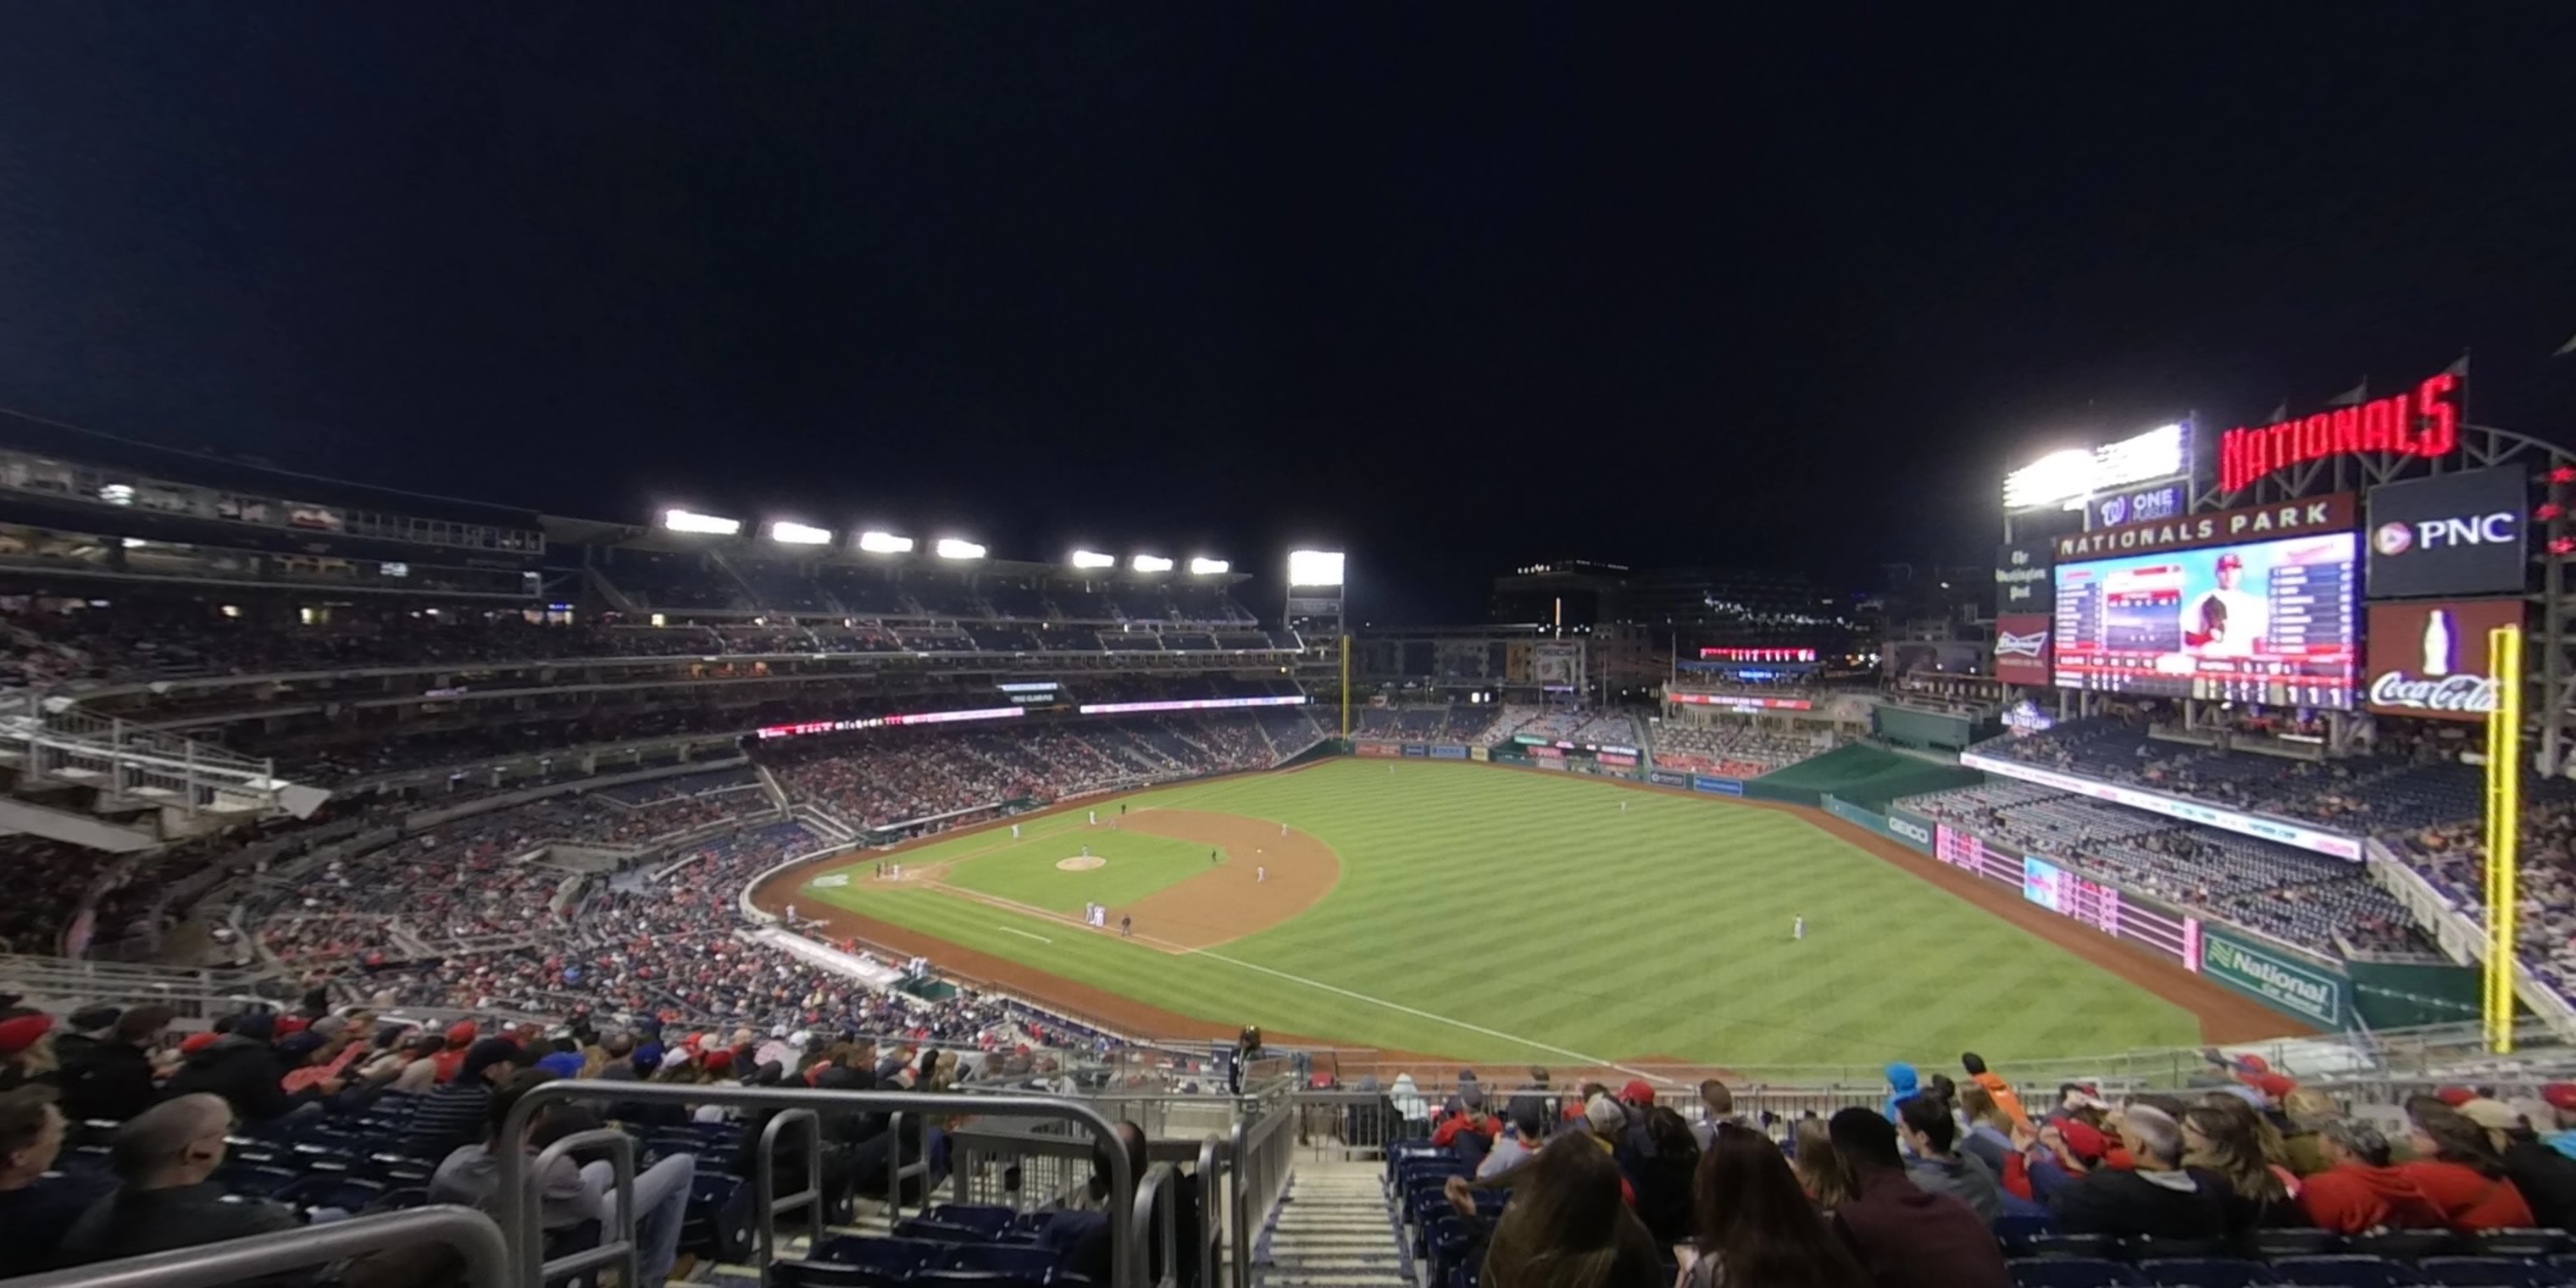 section 222 panoramic seat view  for baseball - nationals park